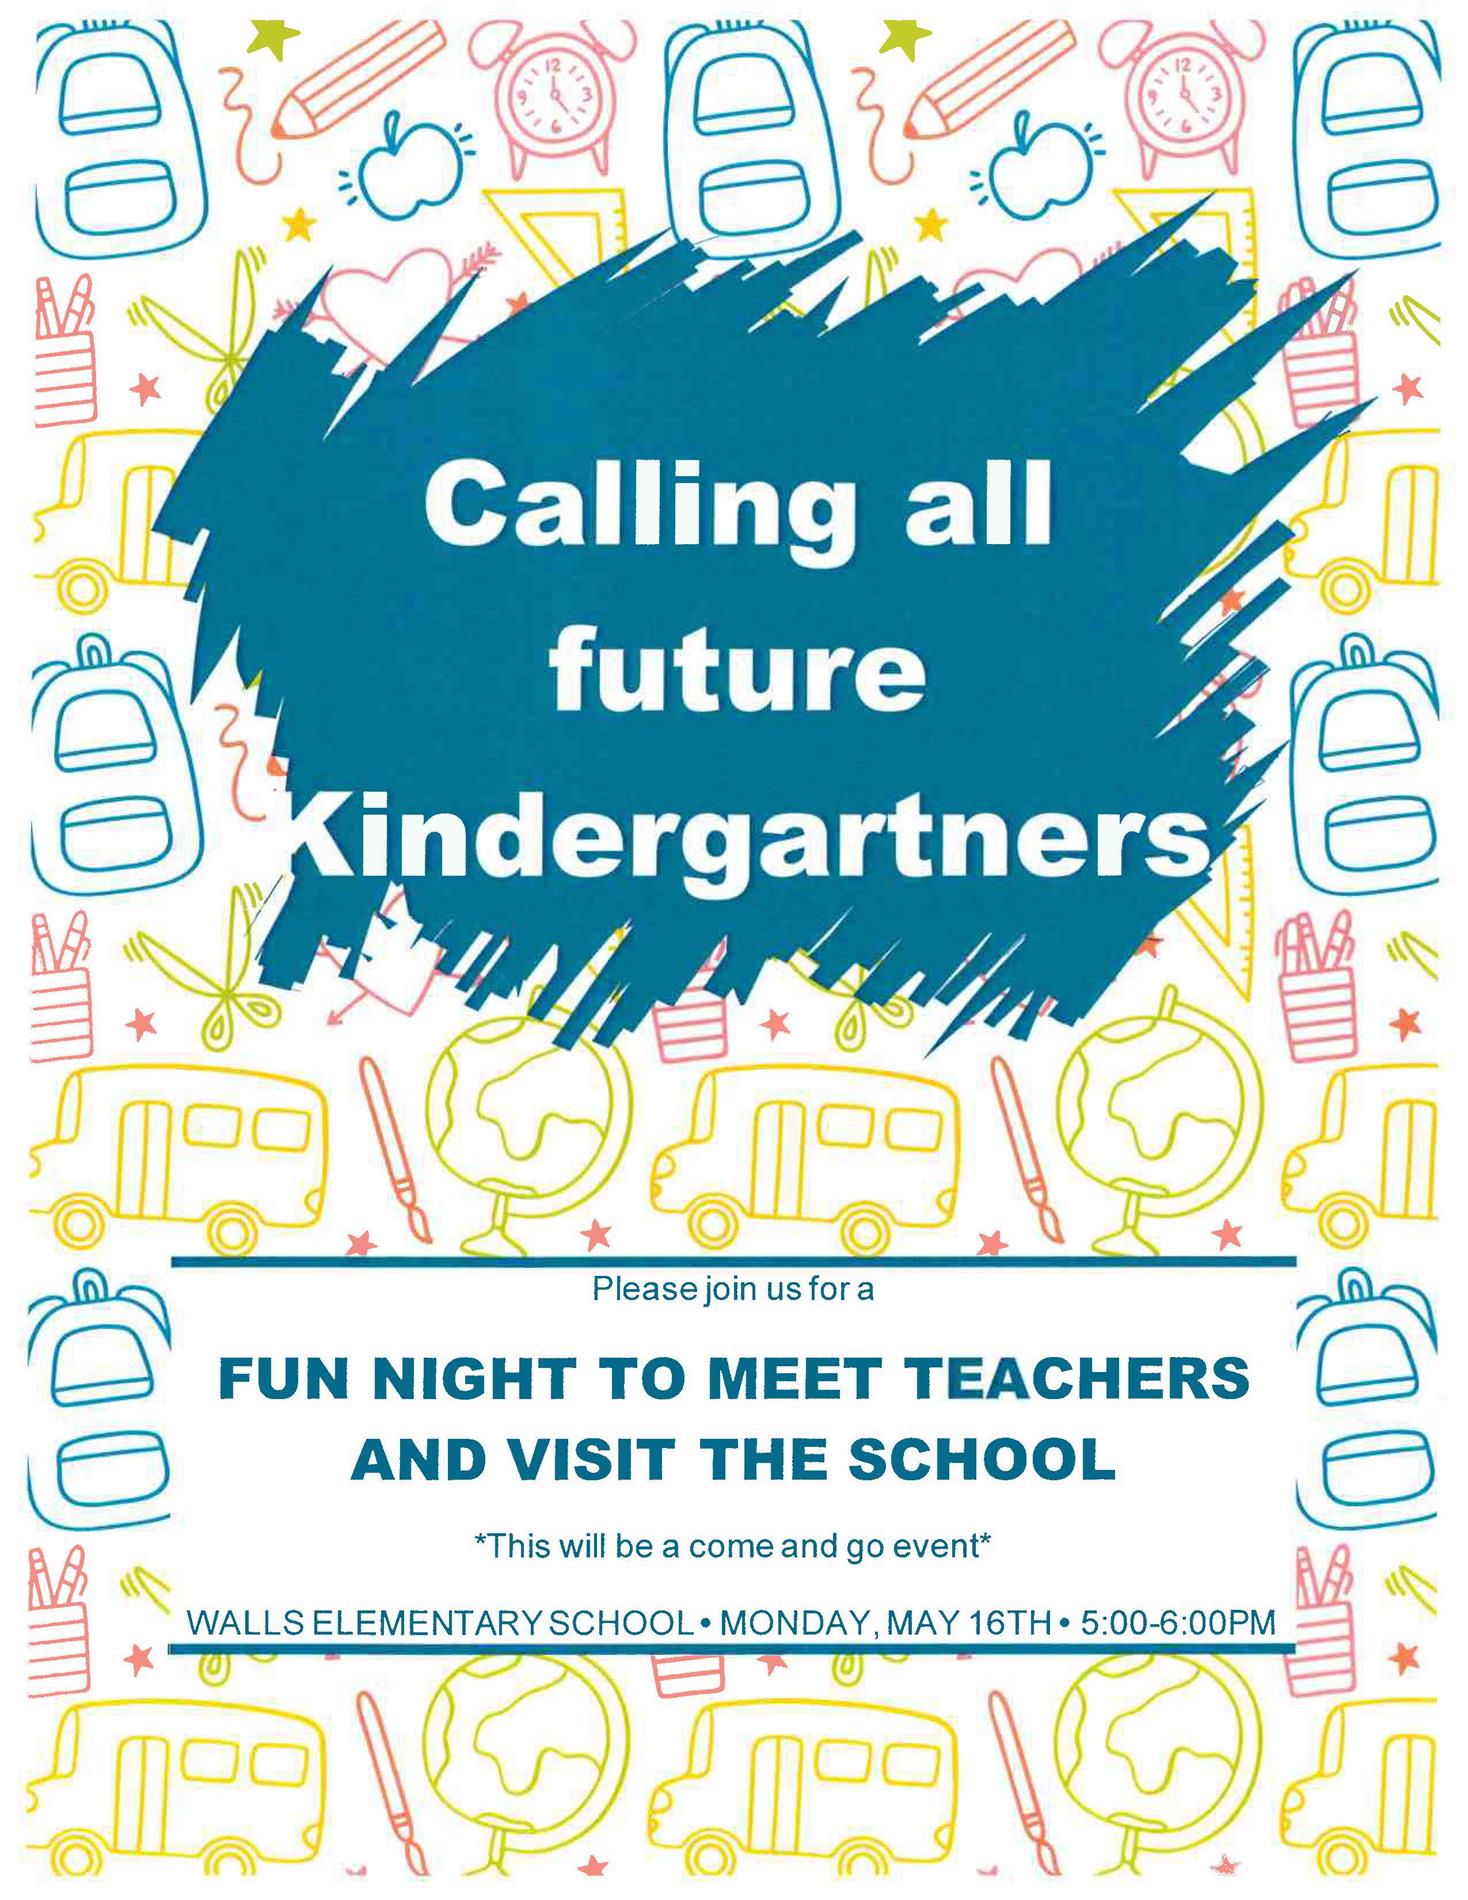 Kindergarten Meeting Monday, May 16th from 5:00-6:00 at Walls Elementary School